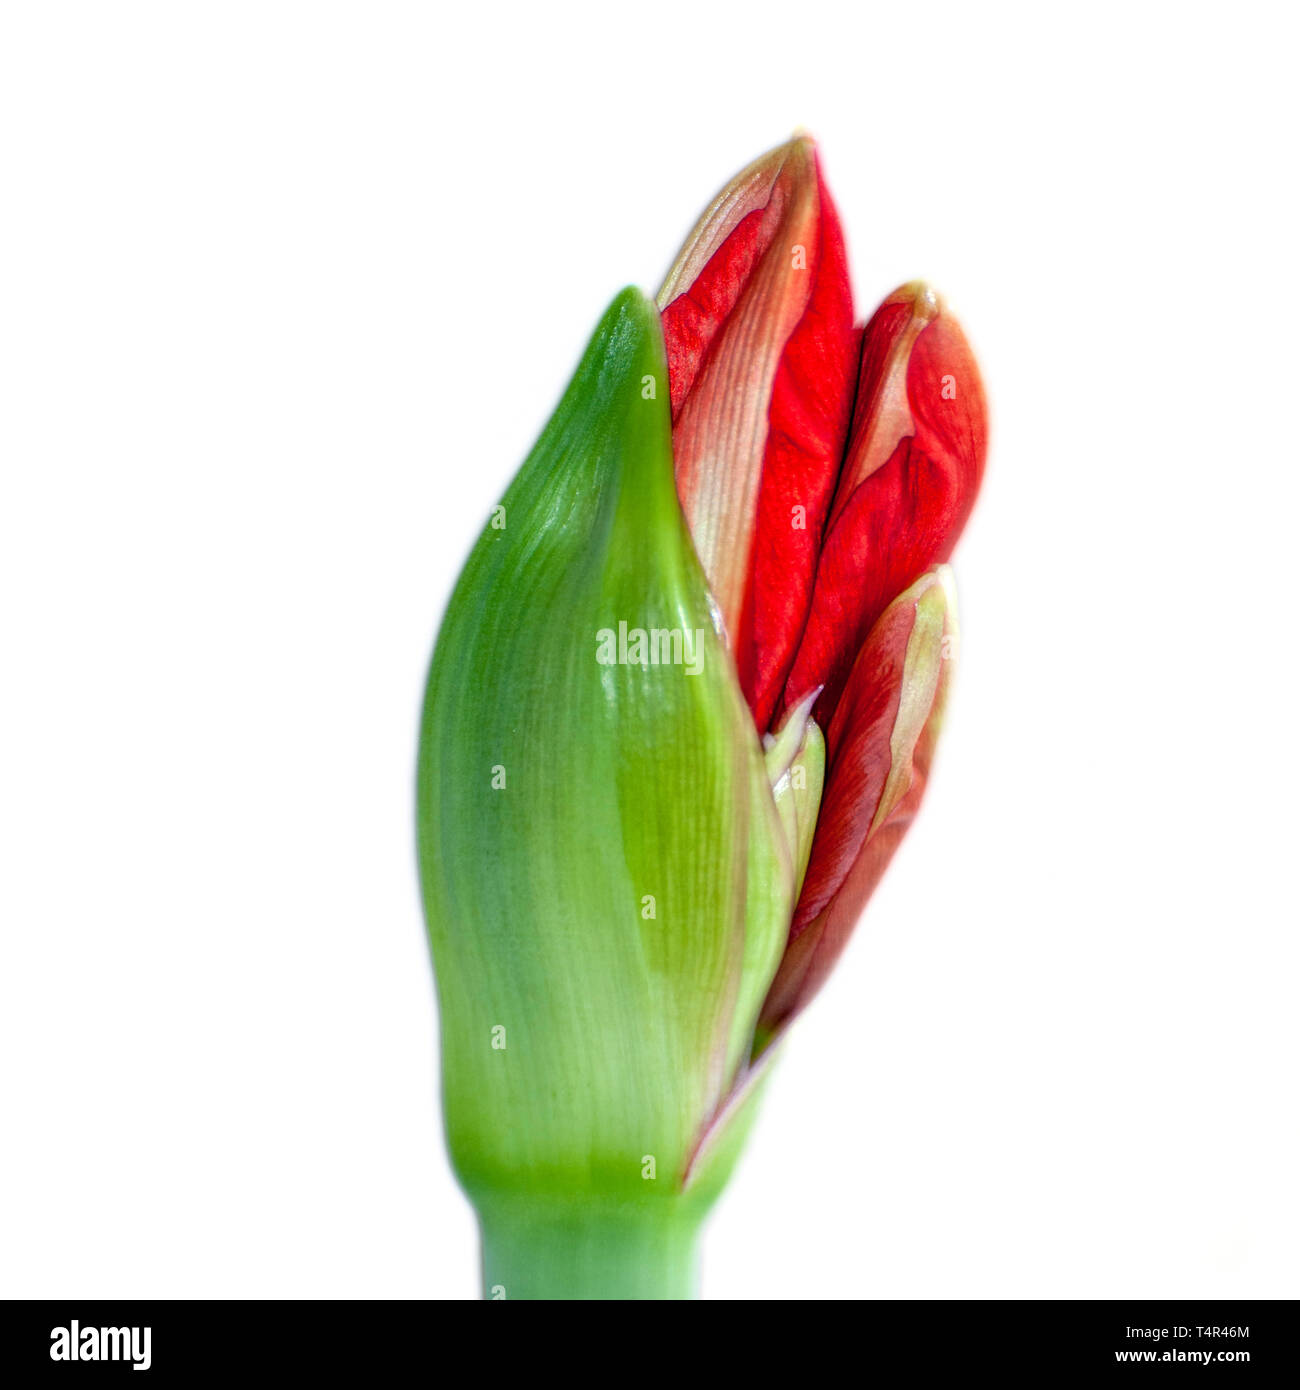 Cut out of a flowering red Hippeastrum flower. (Sometimes called incorrectly, amaryllis). emerging from the bud. Photographed in Israel in March Stock Photo